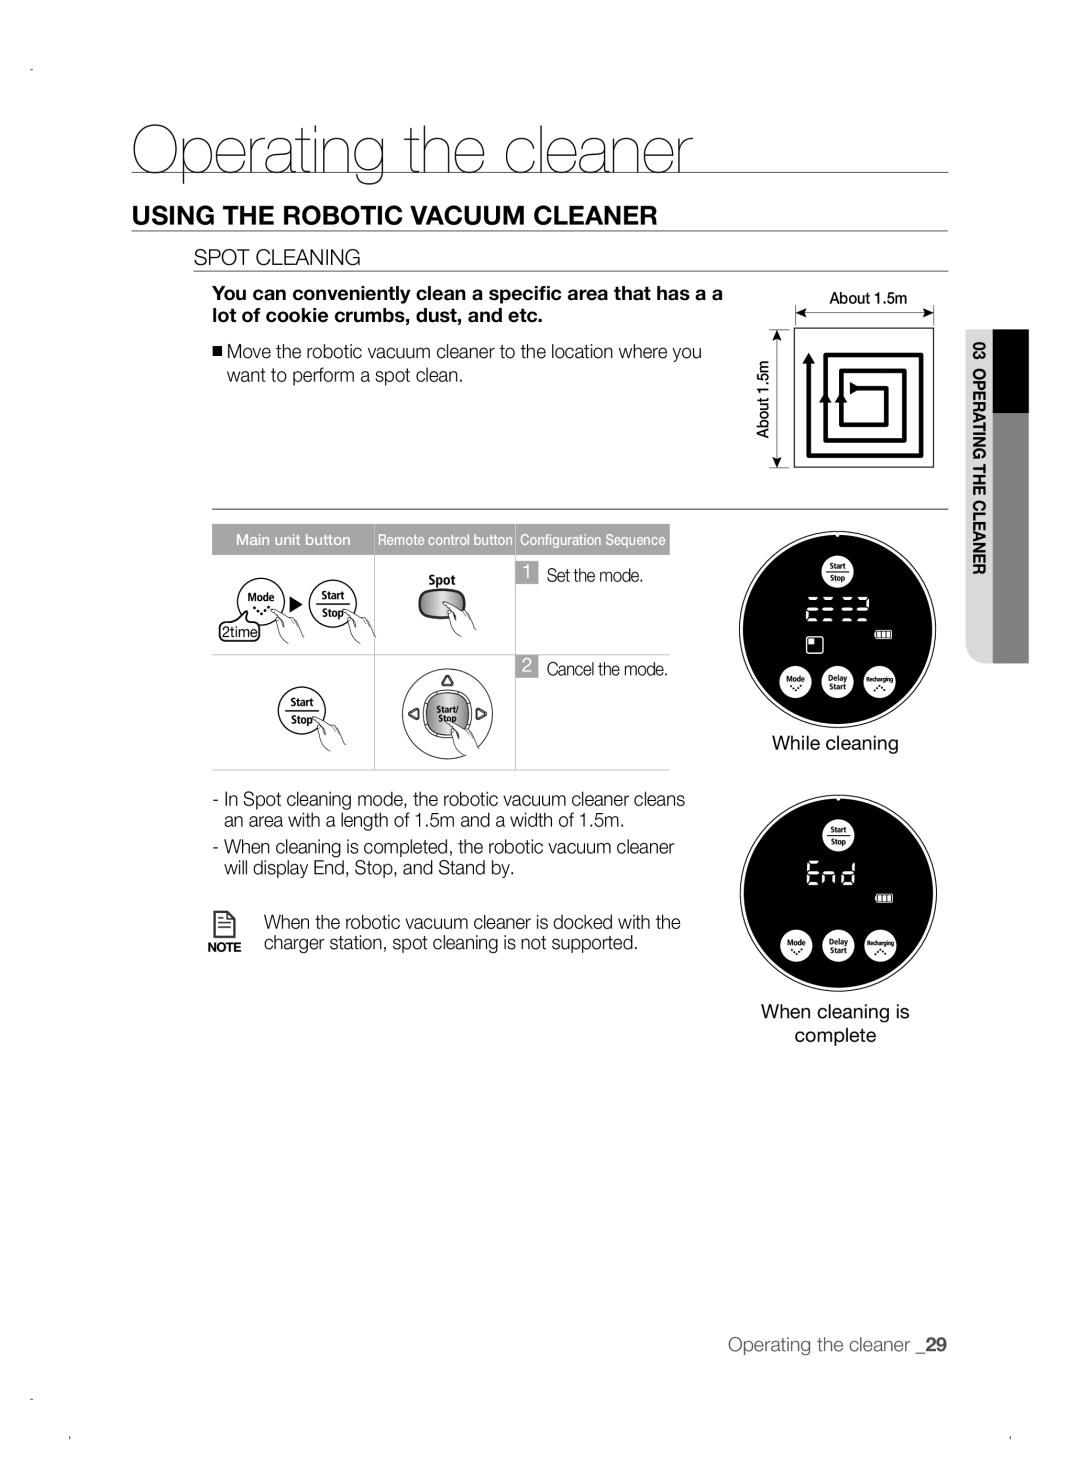 Samsung VCR8845T3A/XEO, VCR8845T3A/XET manual Operating the cleaner, Using the robotic vacuum cleaner, Spot Cleaning 